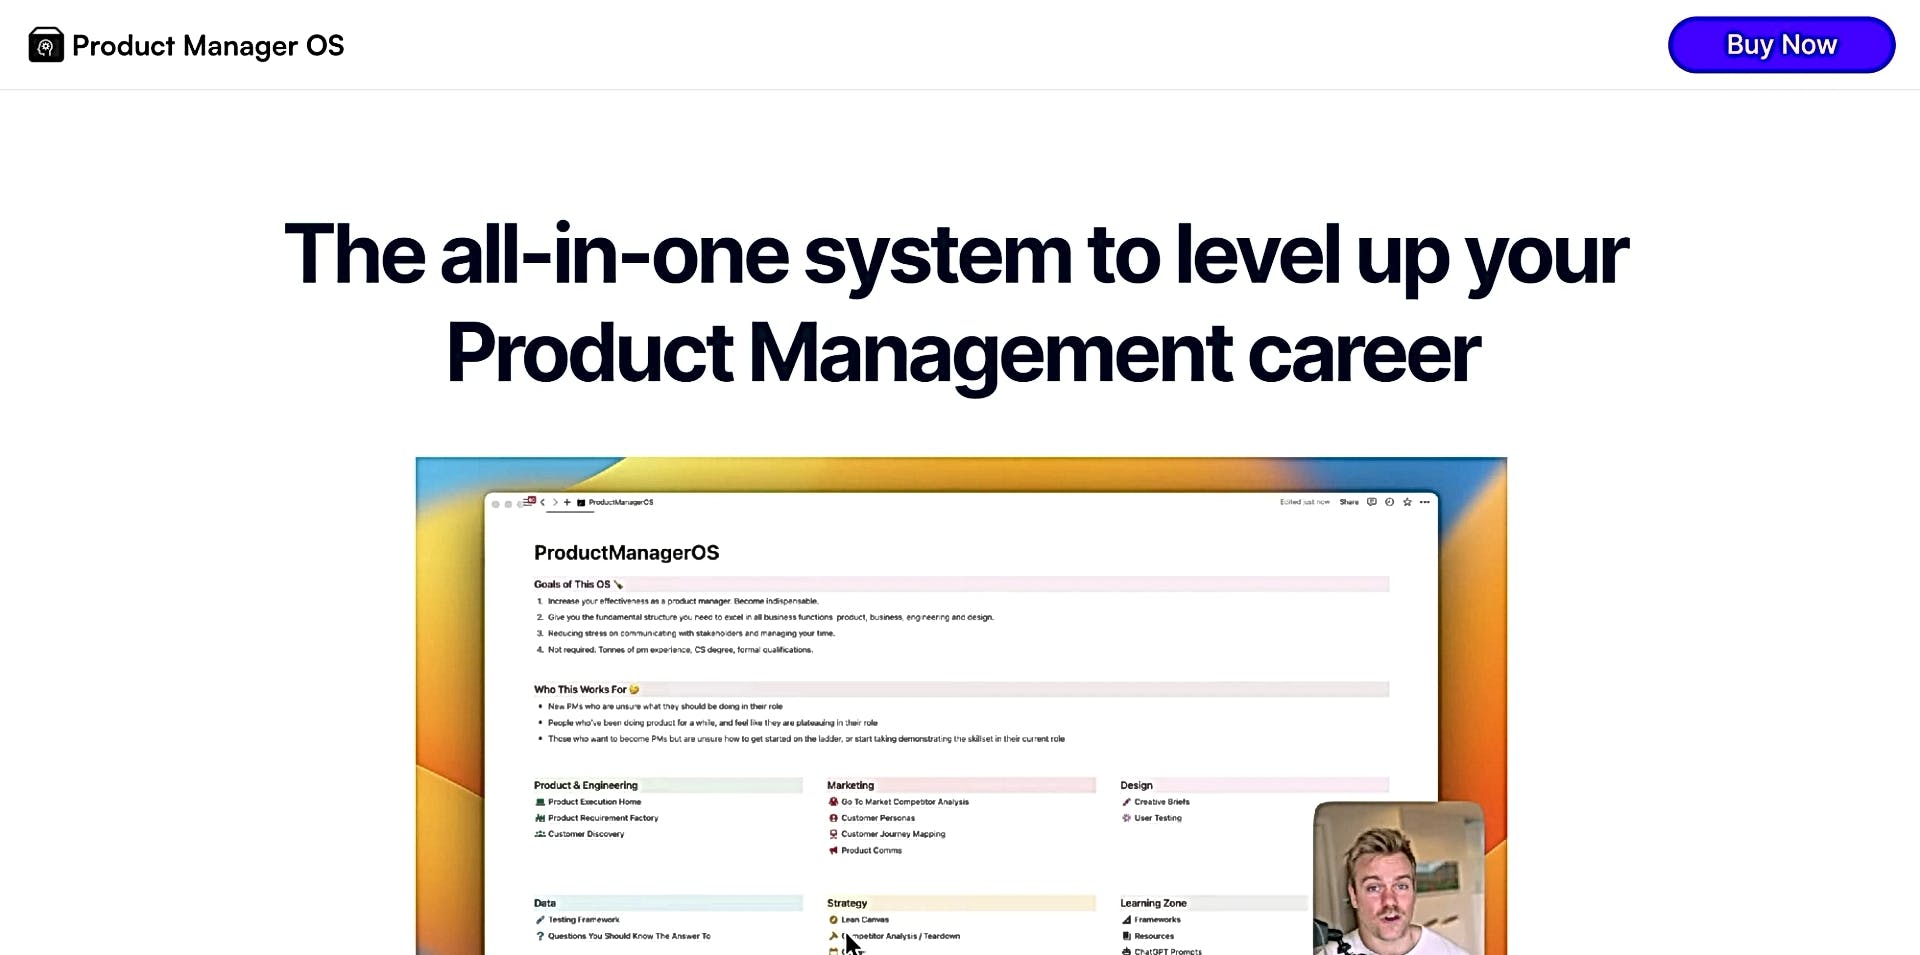 Product Manager OS featured